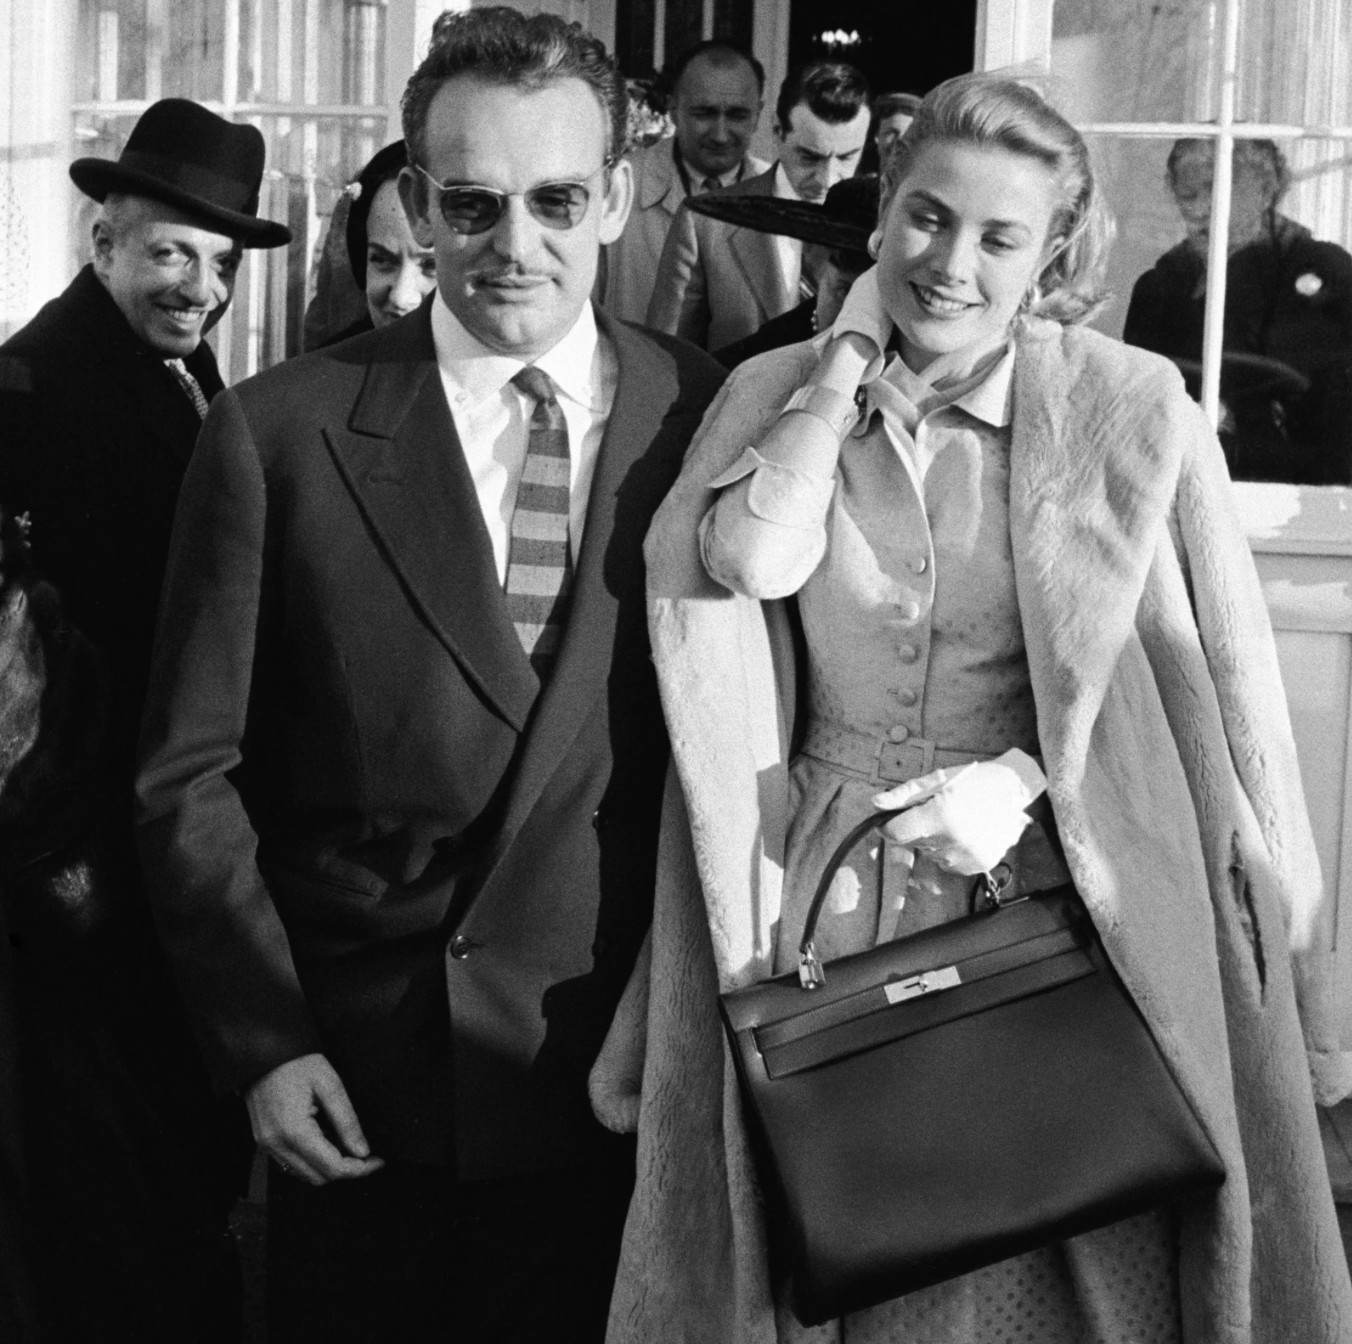 In 1956, a pregnant Grace Kelly, Princess of Monaco, hid her baby bump behind an Hermès bag 